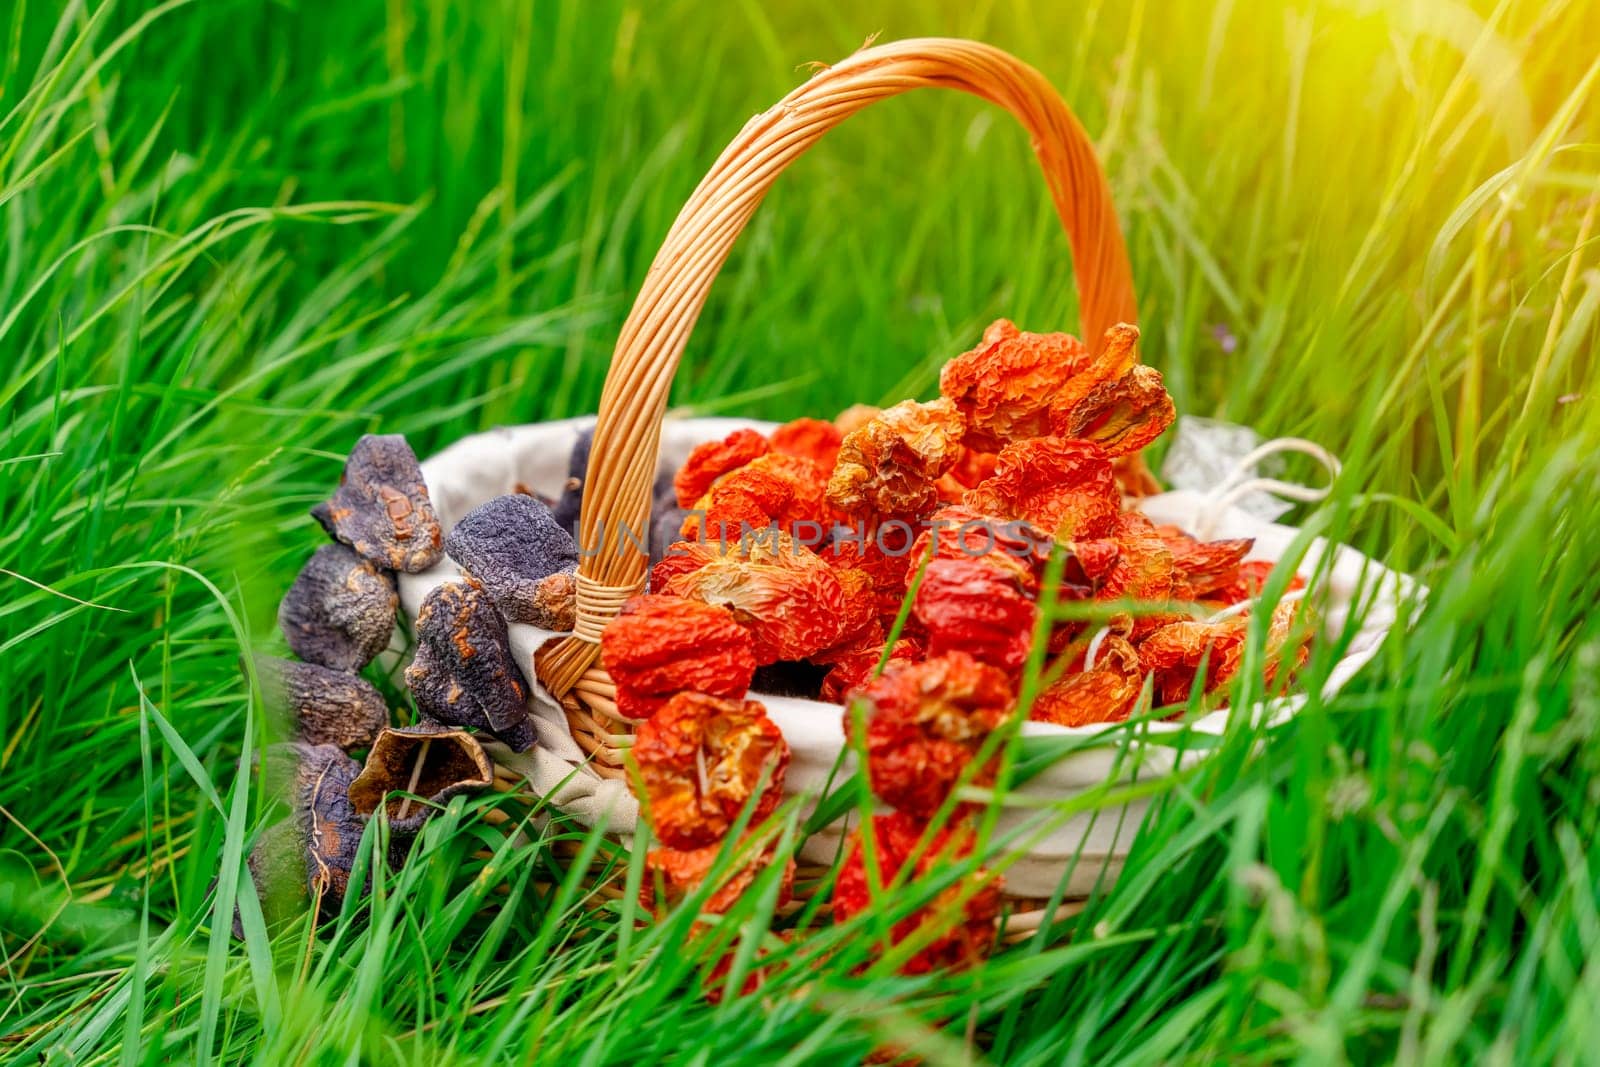 basket with Dried Bell Pepper and Dried Stuffed Eggplant in the grass for a picnic by Iryna_Melnyk